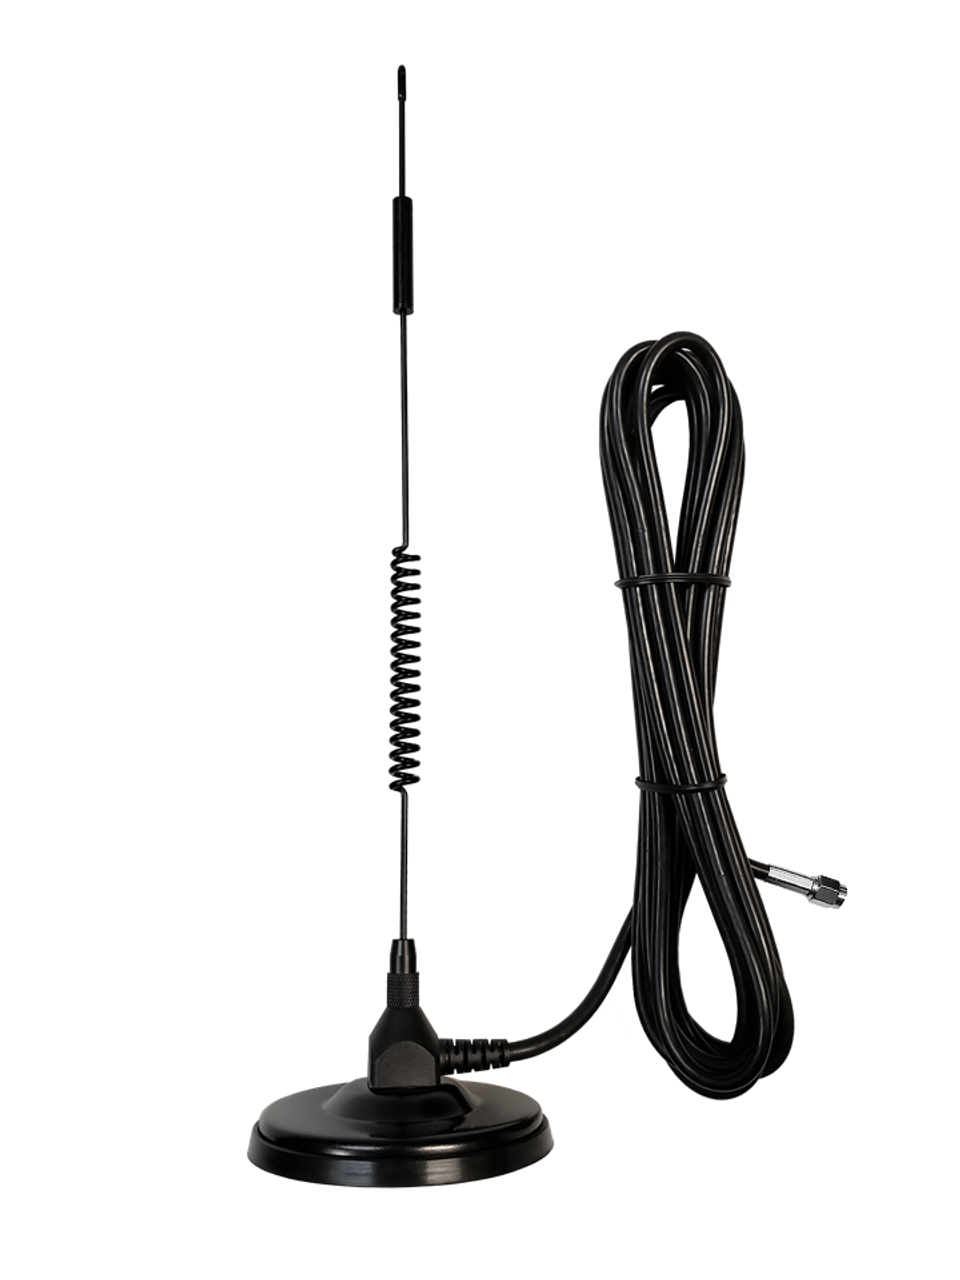 HD 7dBi Military Grade Omni Cellular 3G 4G LTE 5G Magnetic Mount Antenna w/12ft Cable - SMA Male